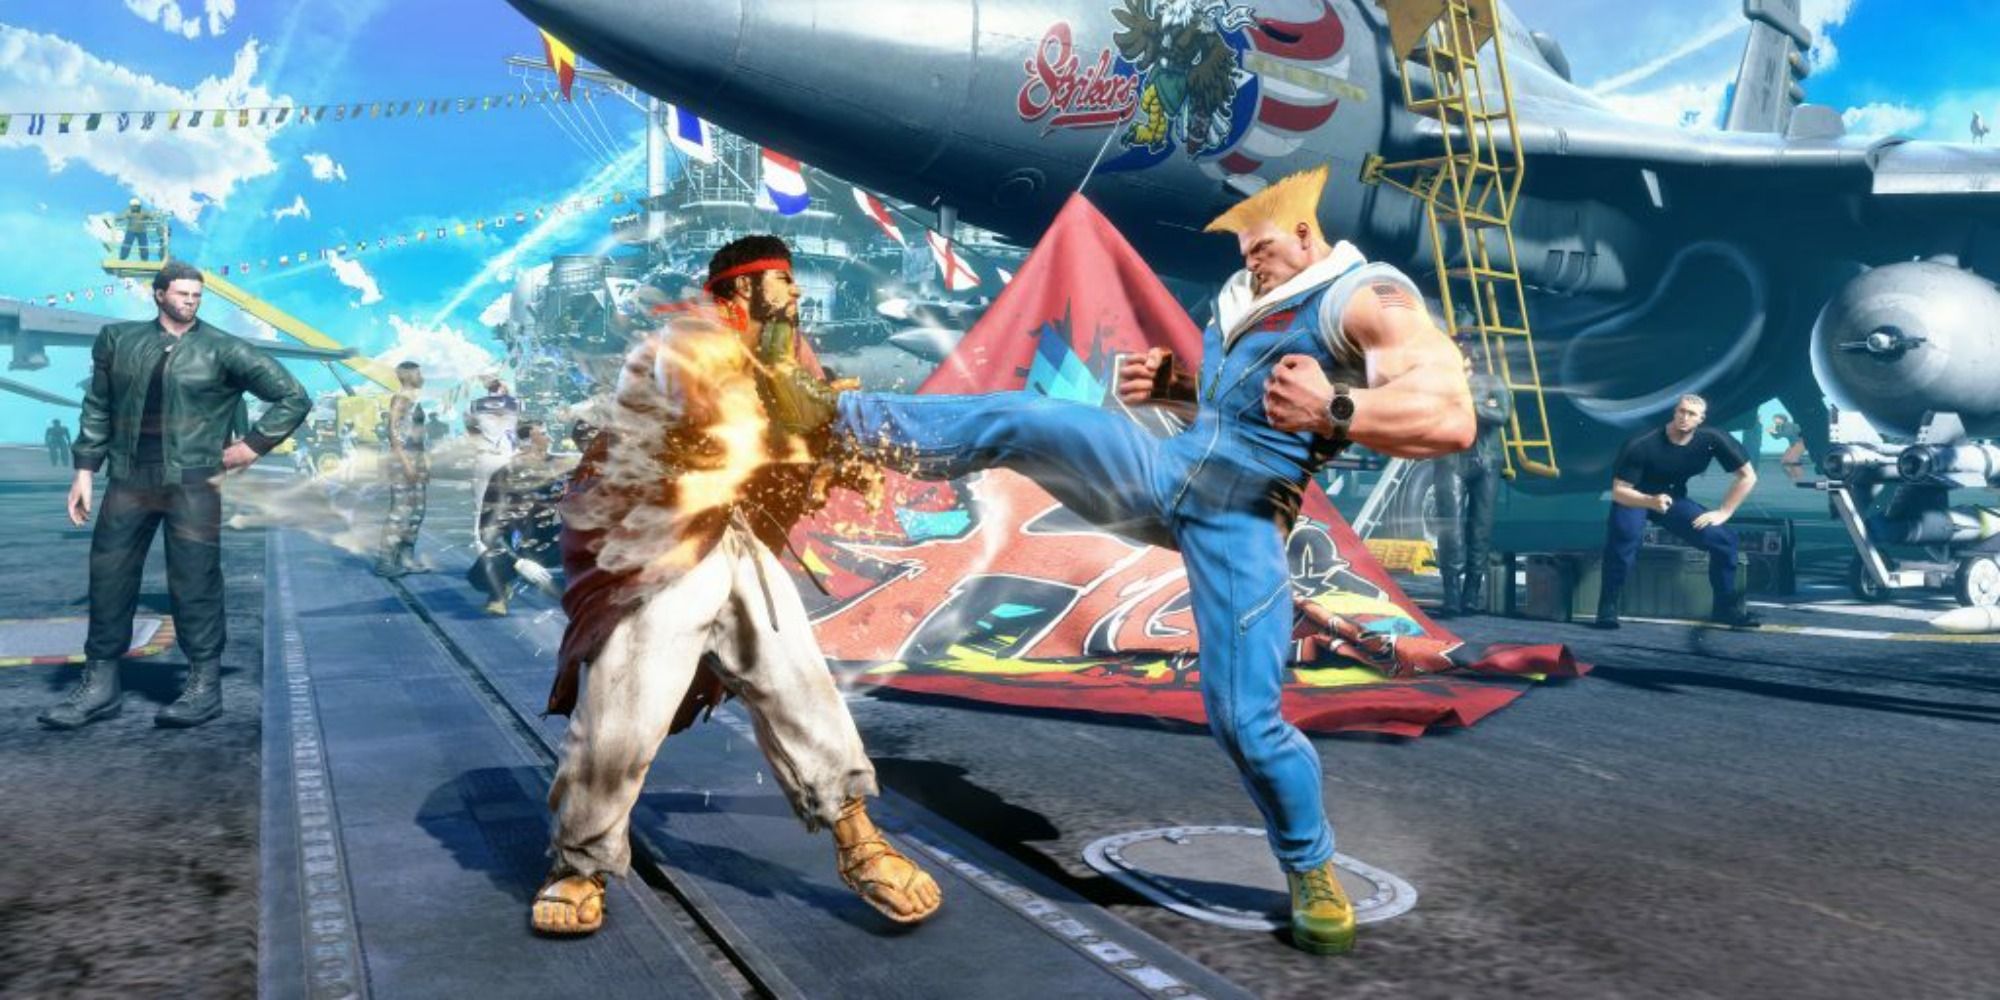 Guile performing a Standing Heavy Kick in Street Fighter 6